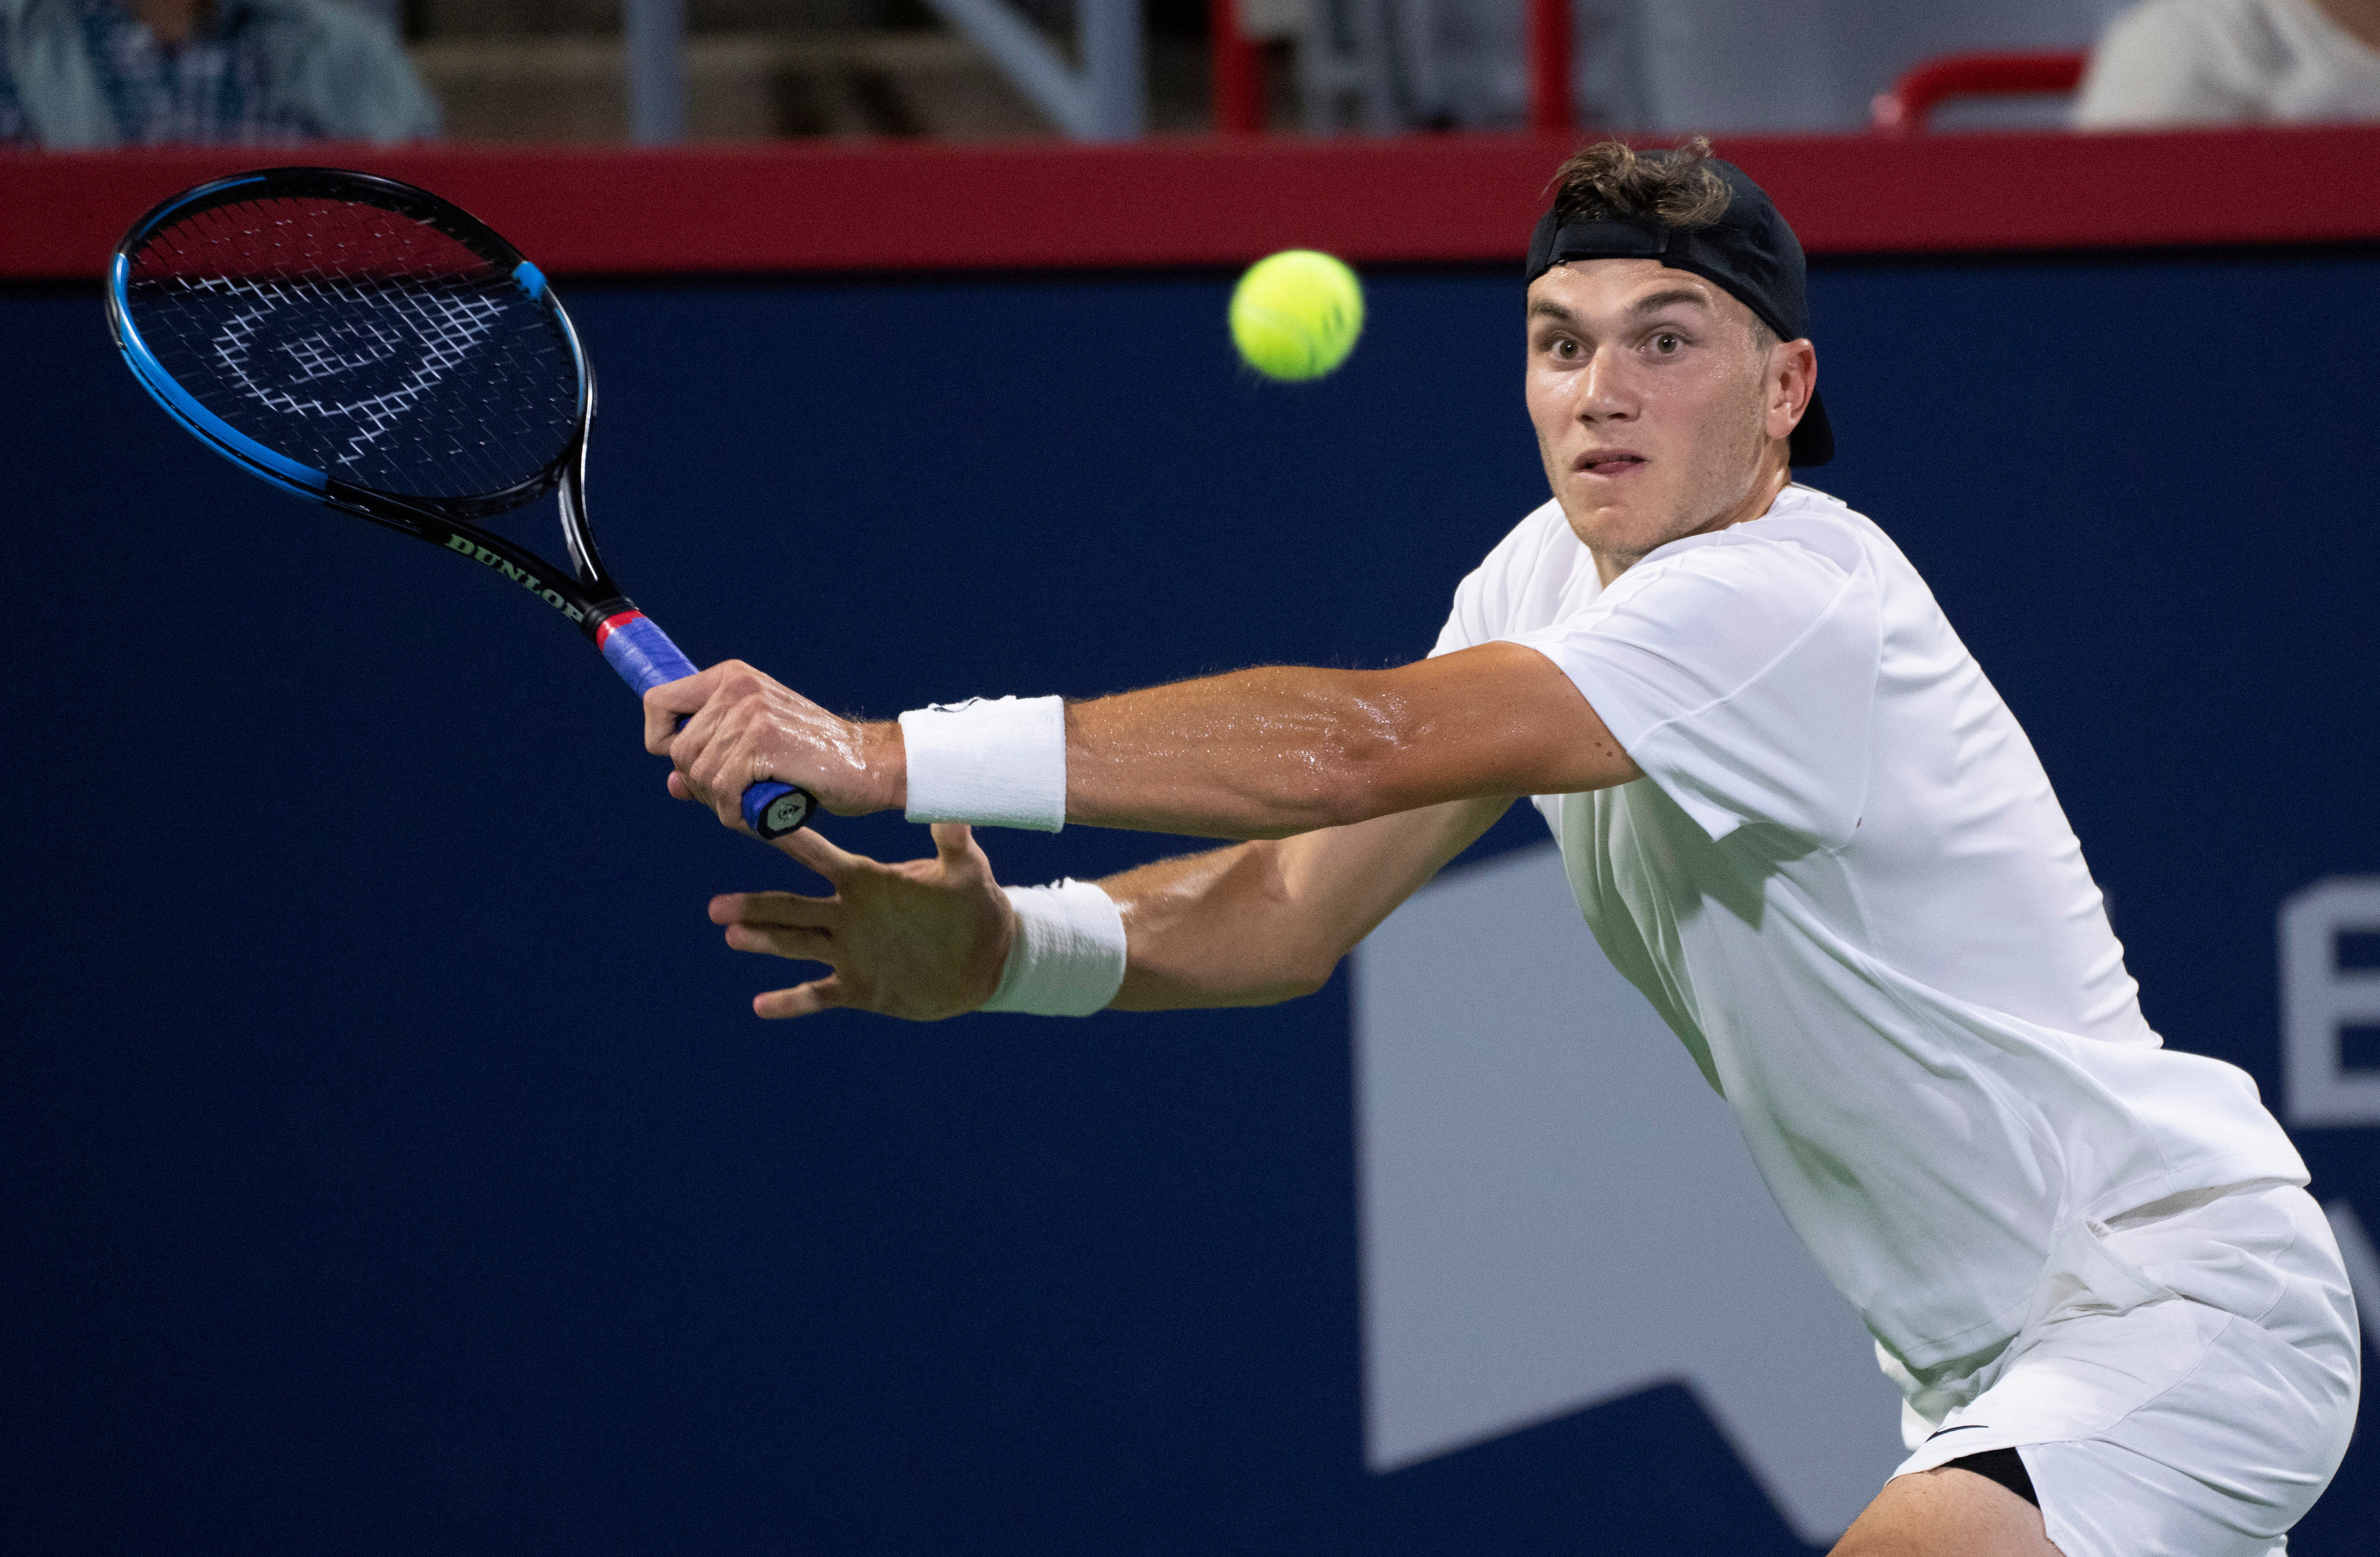 Jack Draper and Dan Evans set up a possible last-four meeting after both continued their winning ways at the National Bank Open (Paul Chiasson/The Canadian Press/AP)